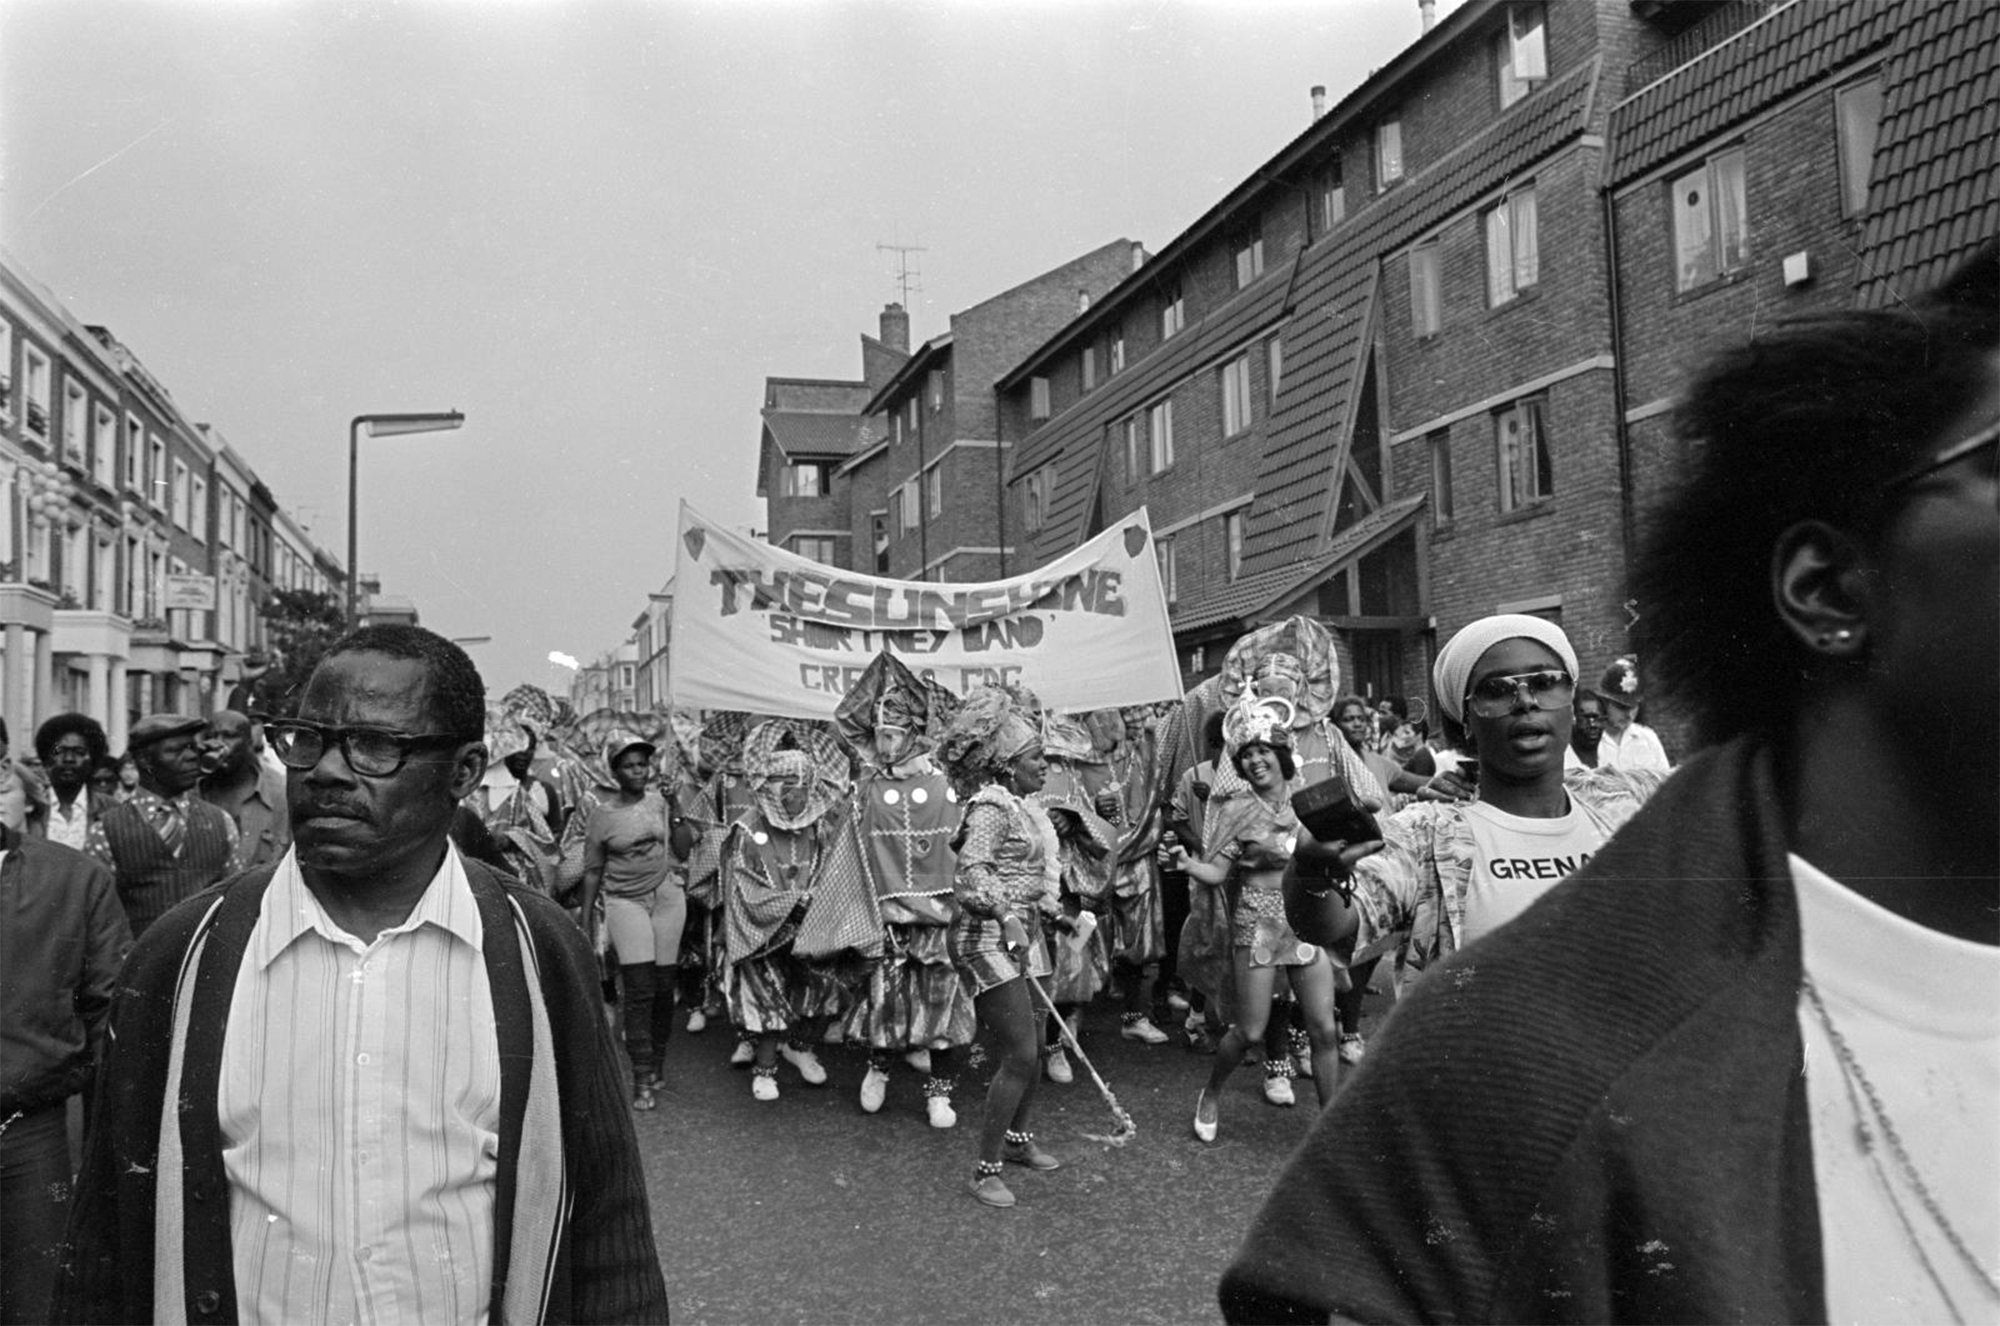 Black and white crowd photo at Notting Hill Carnival